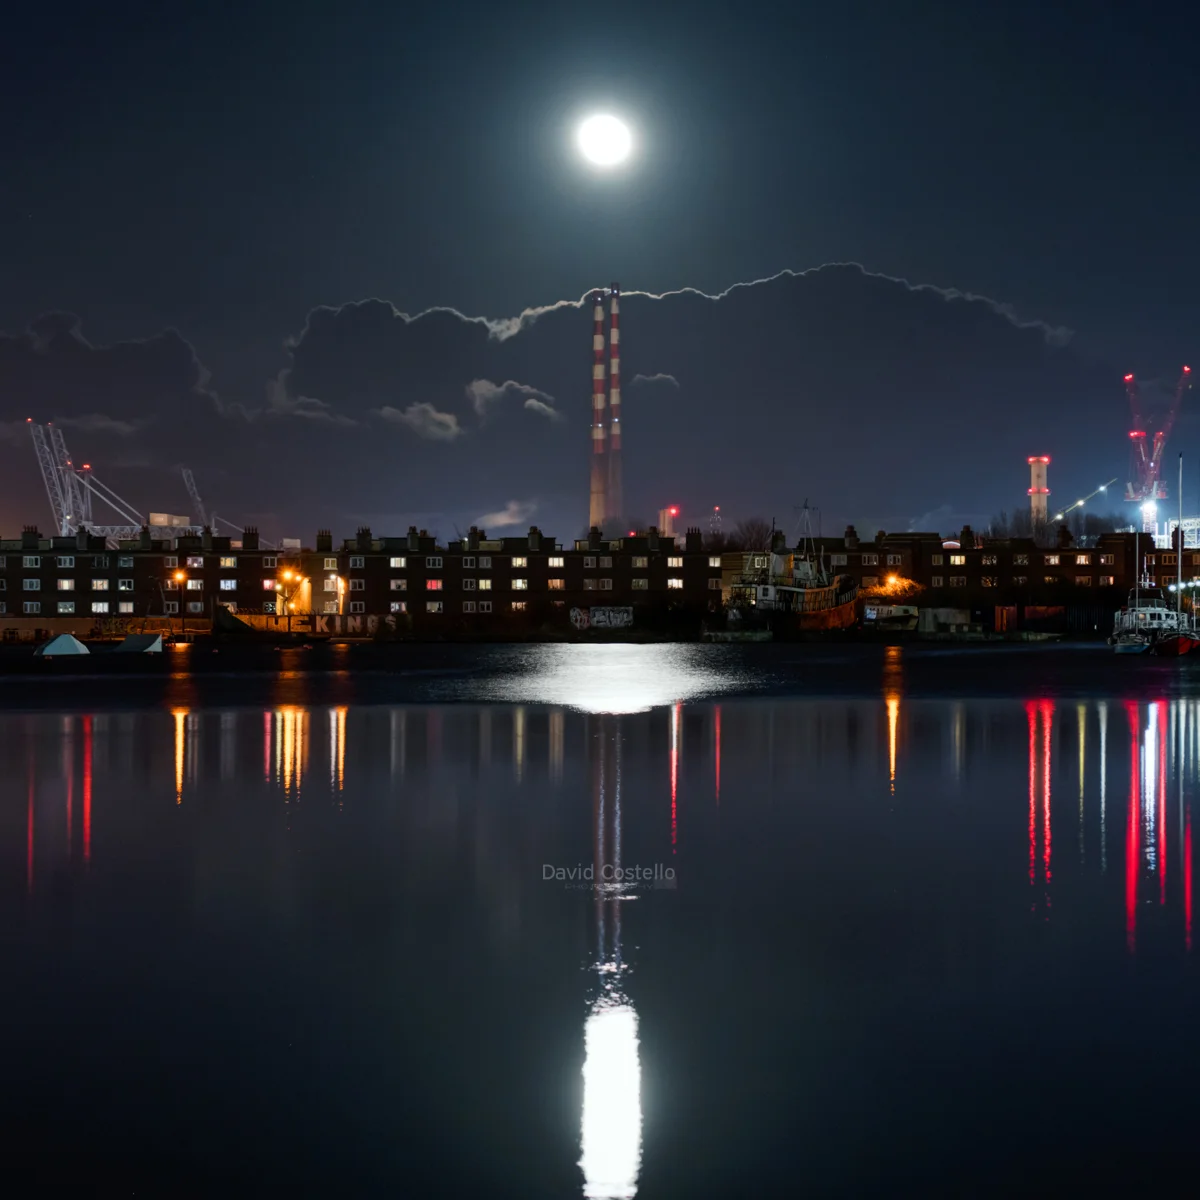 The Full Moon rises above Poolbeg Lighthouse on a beautiful crisp spring evening along the Great South Wall in Dublin.